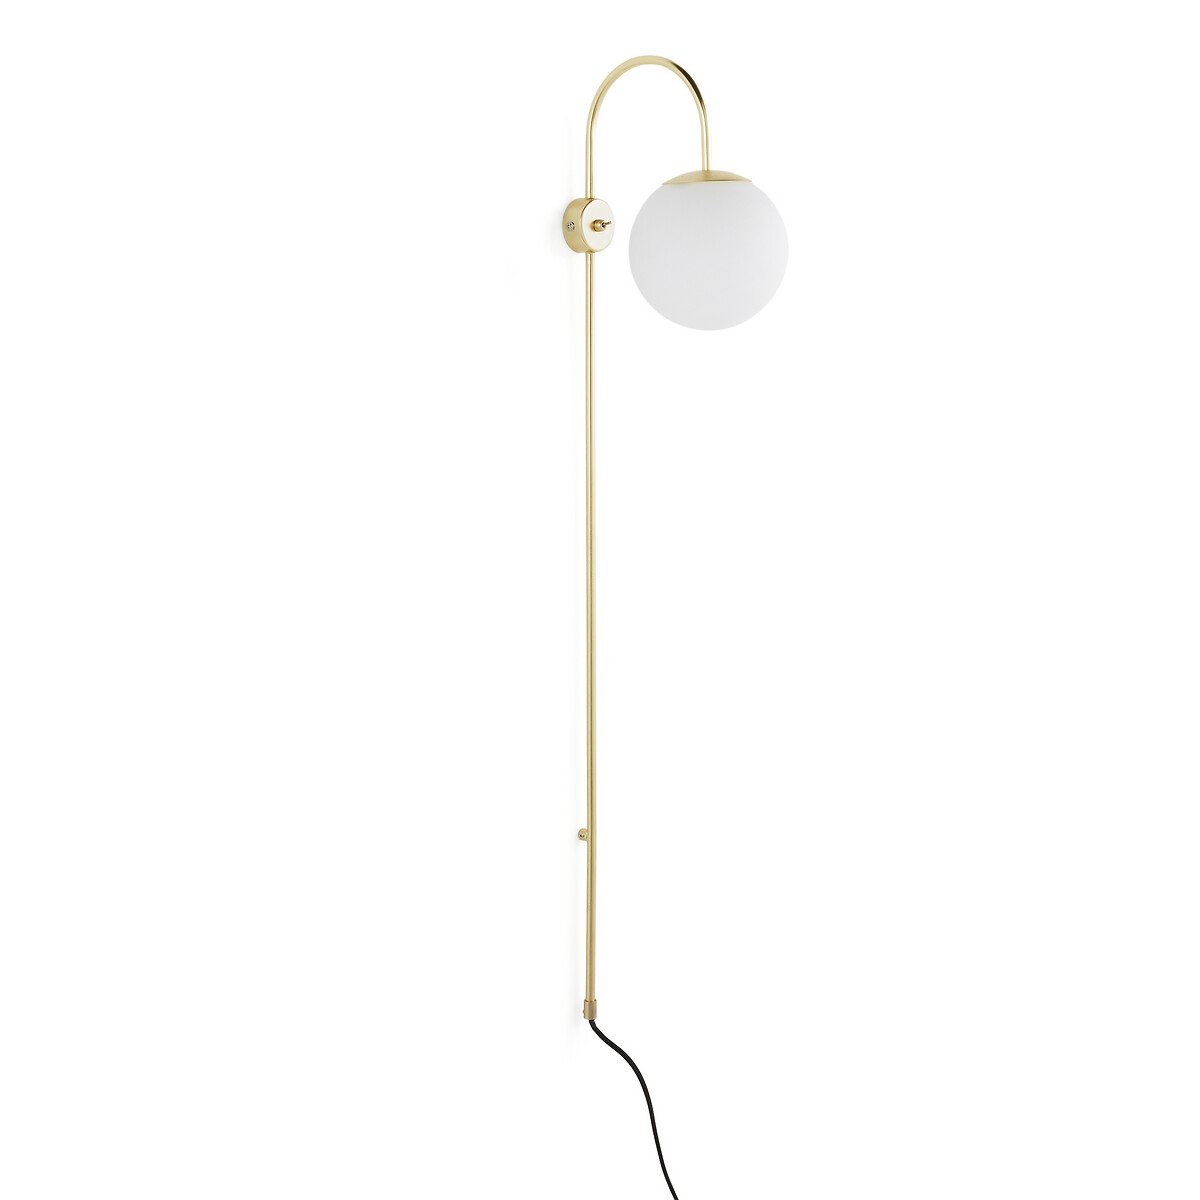 Moricio Wall Light in Brass and Opaline